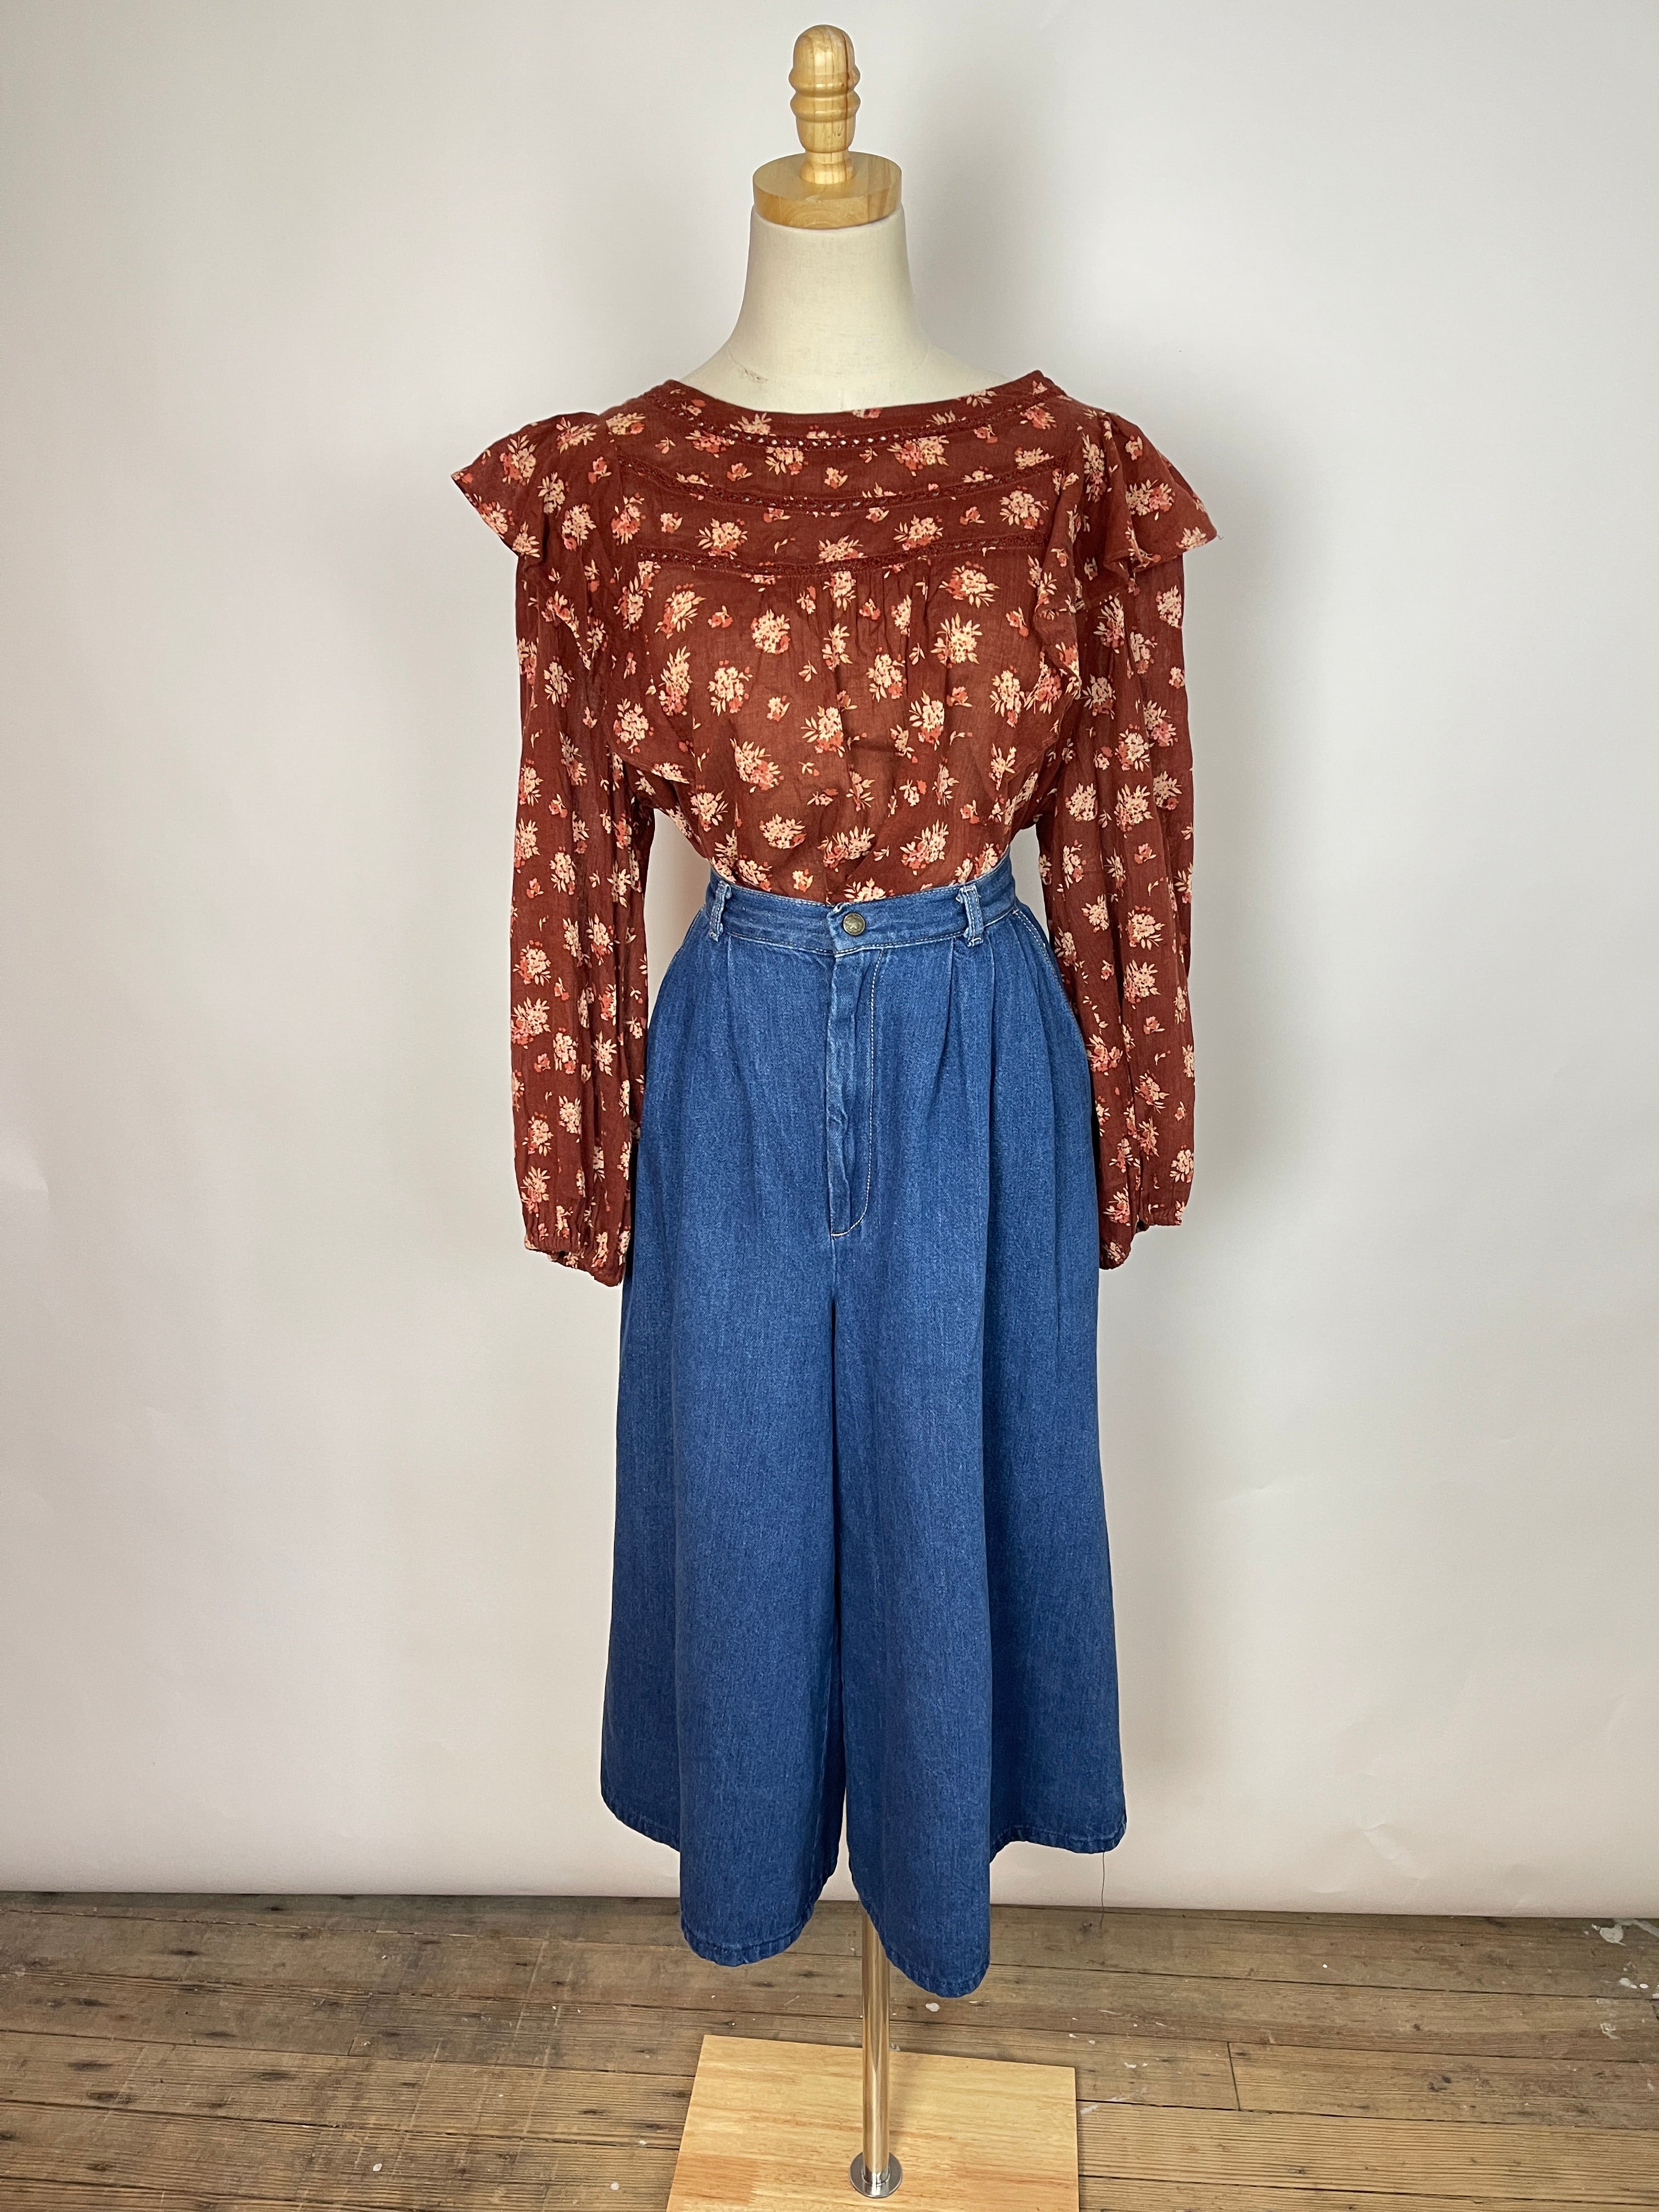 Madewell Floral Blouse (XL)